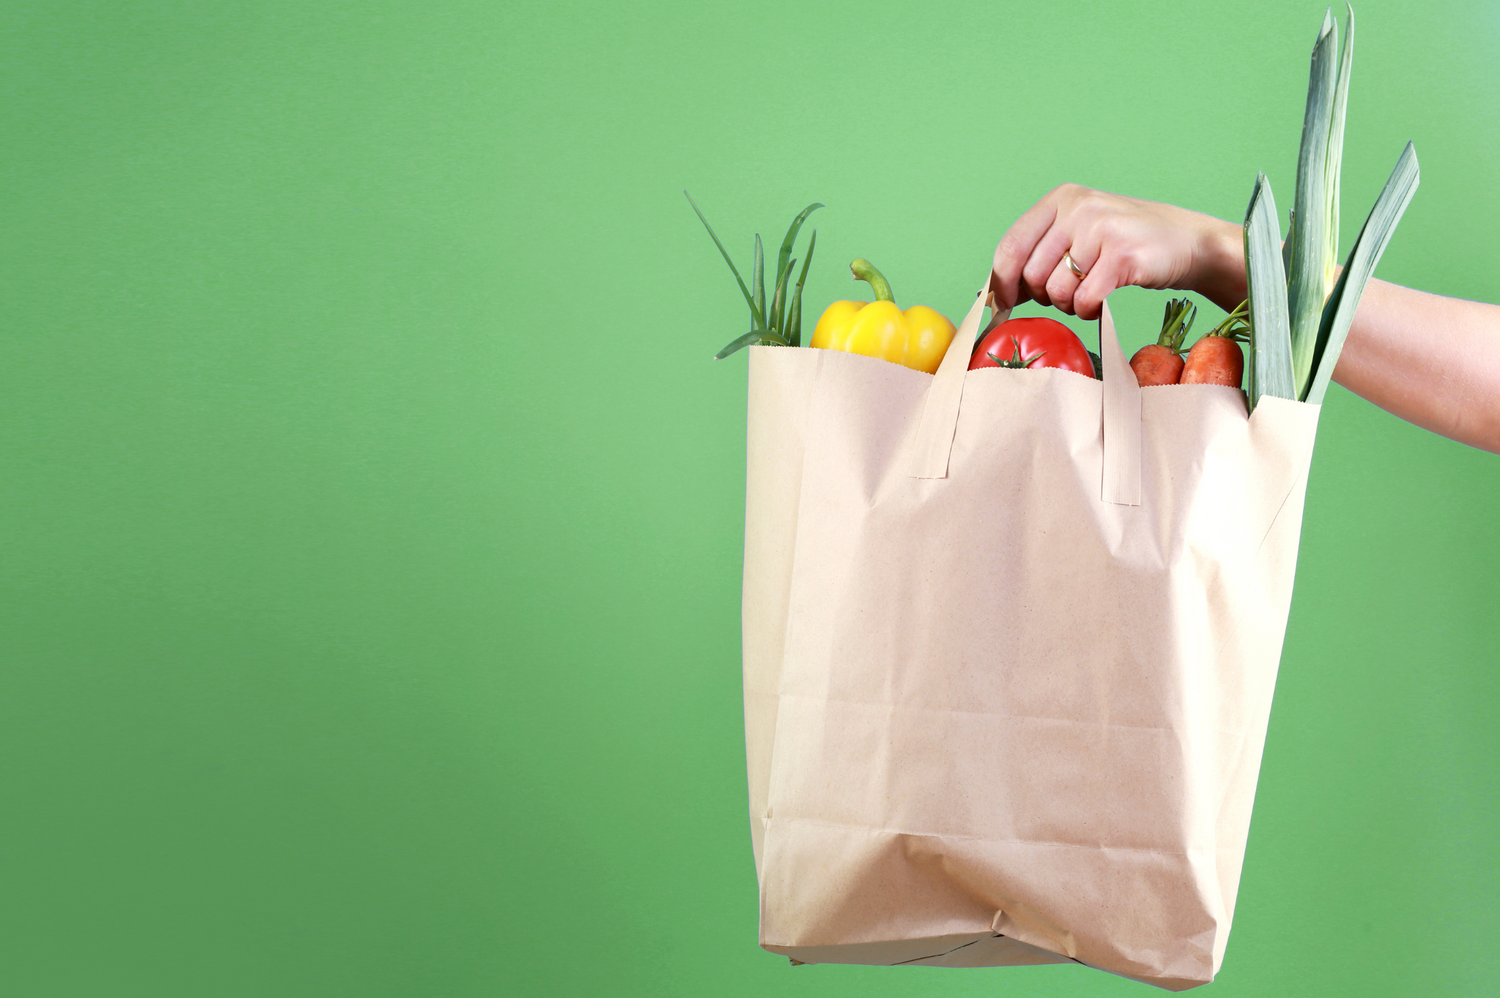 Person holding paper bag filled with groceries against green background